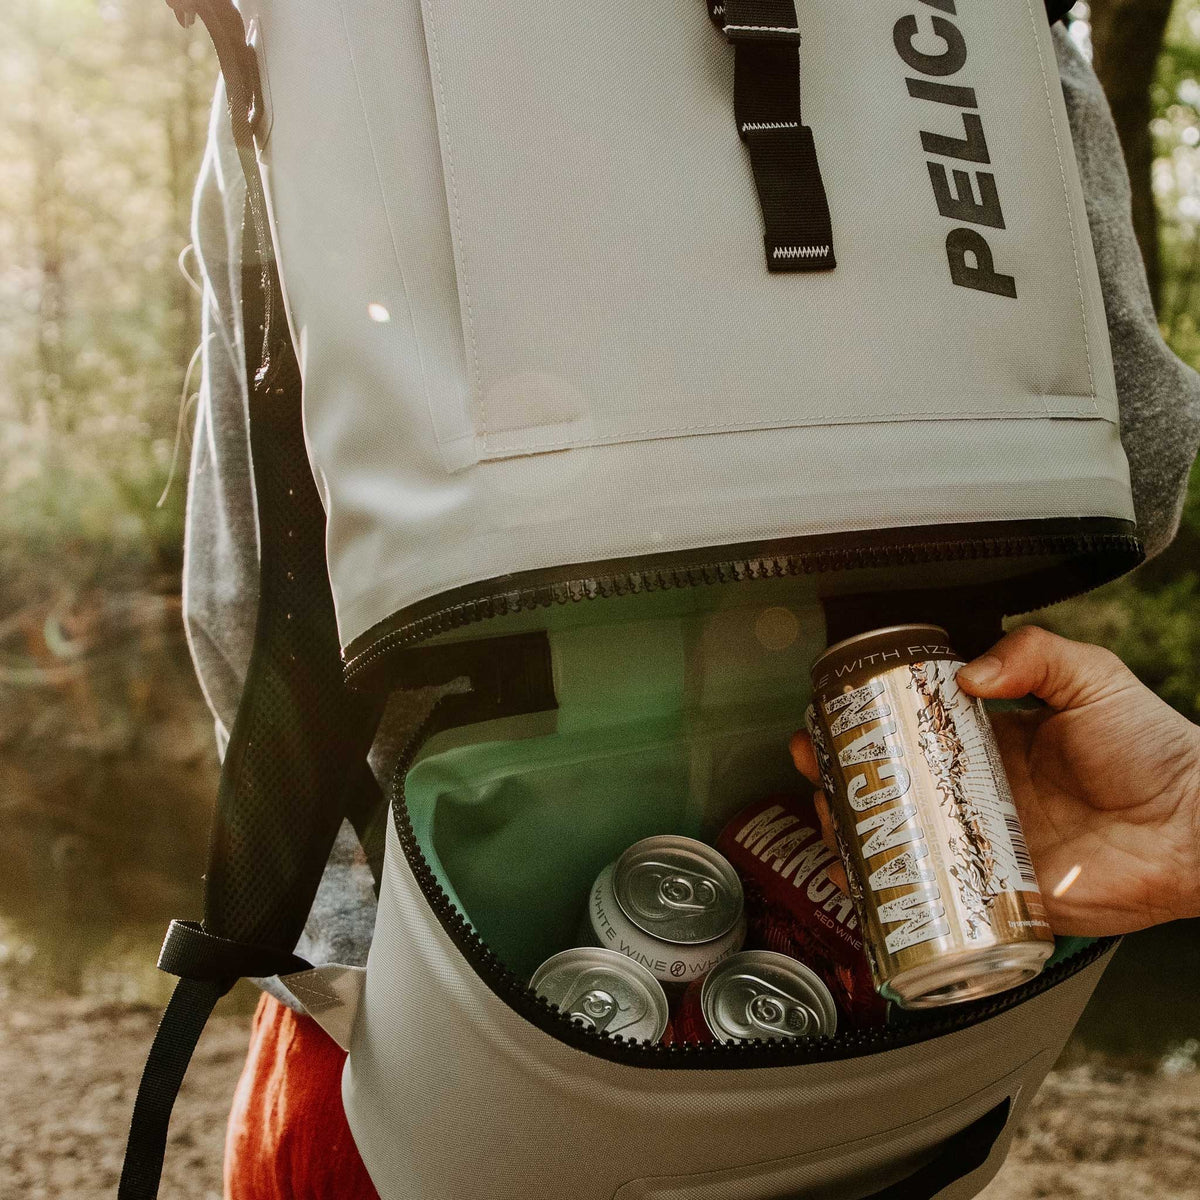 Pelican™ Dayventure Backpack Soft Cooler canned beverages being pulled out of the cooler compartment